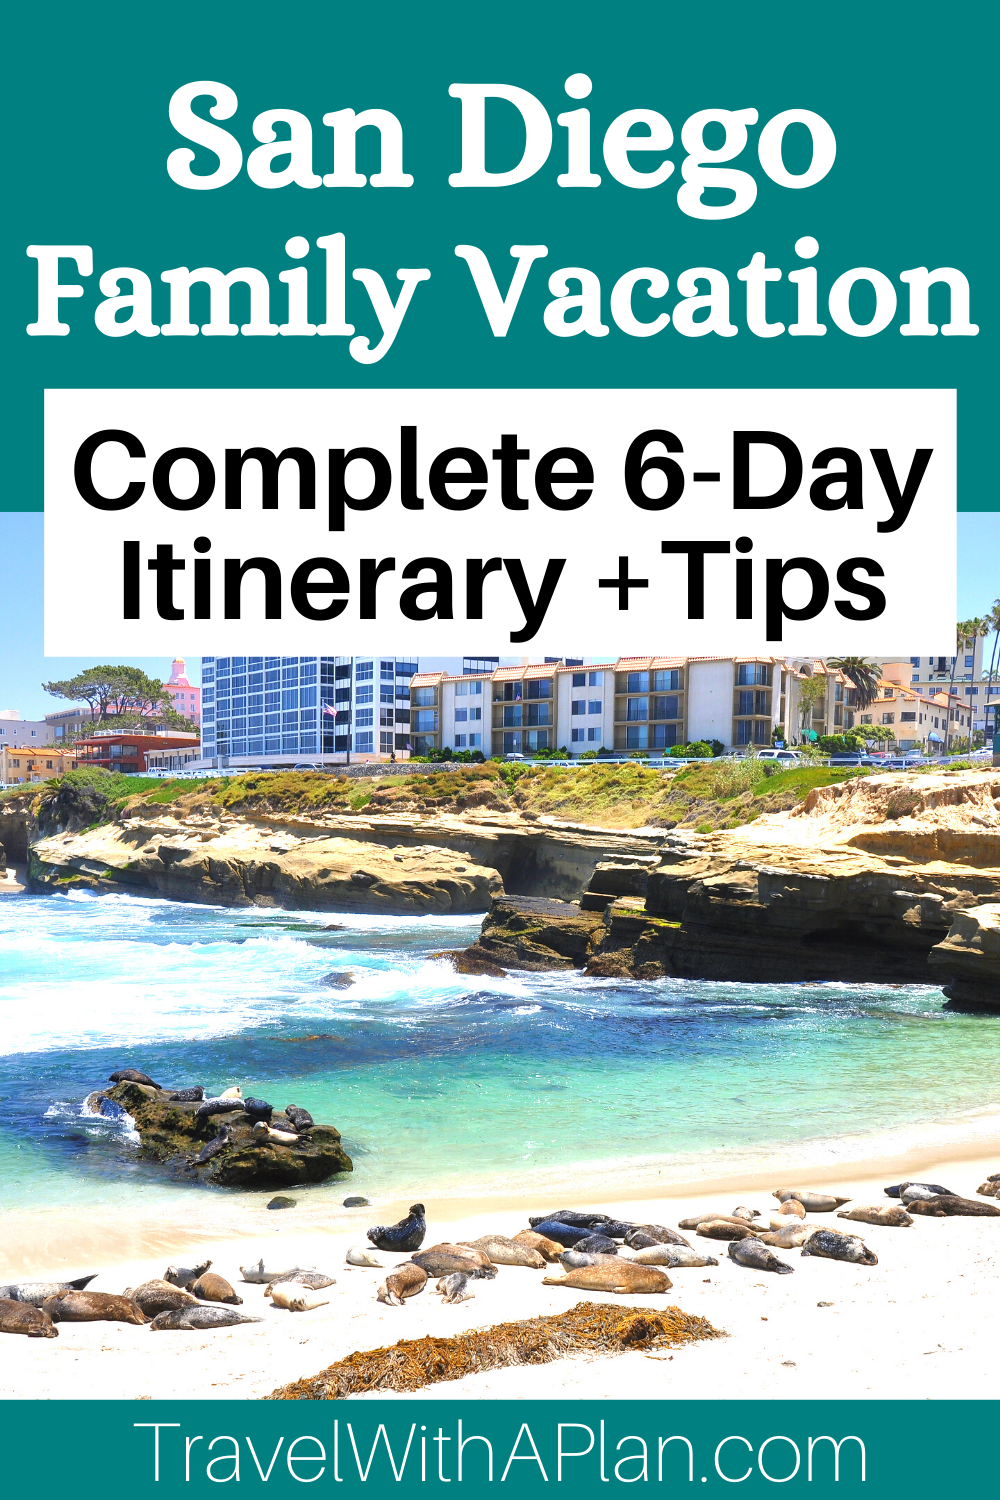 Plan the ultimate San Diego family vacation with this itinerary from Top US Family Travel Blog, Travel With A Plan!